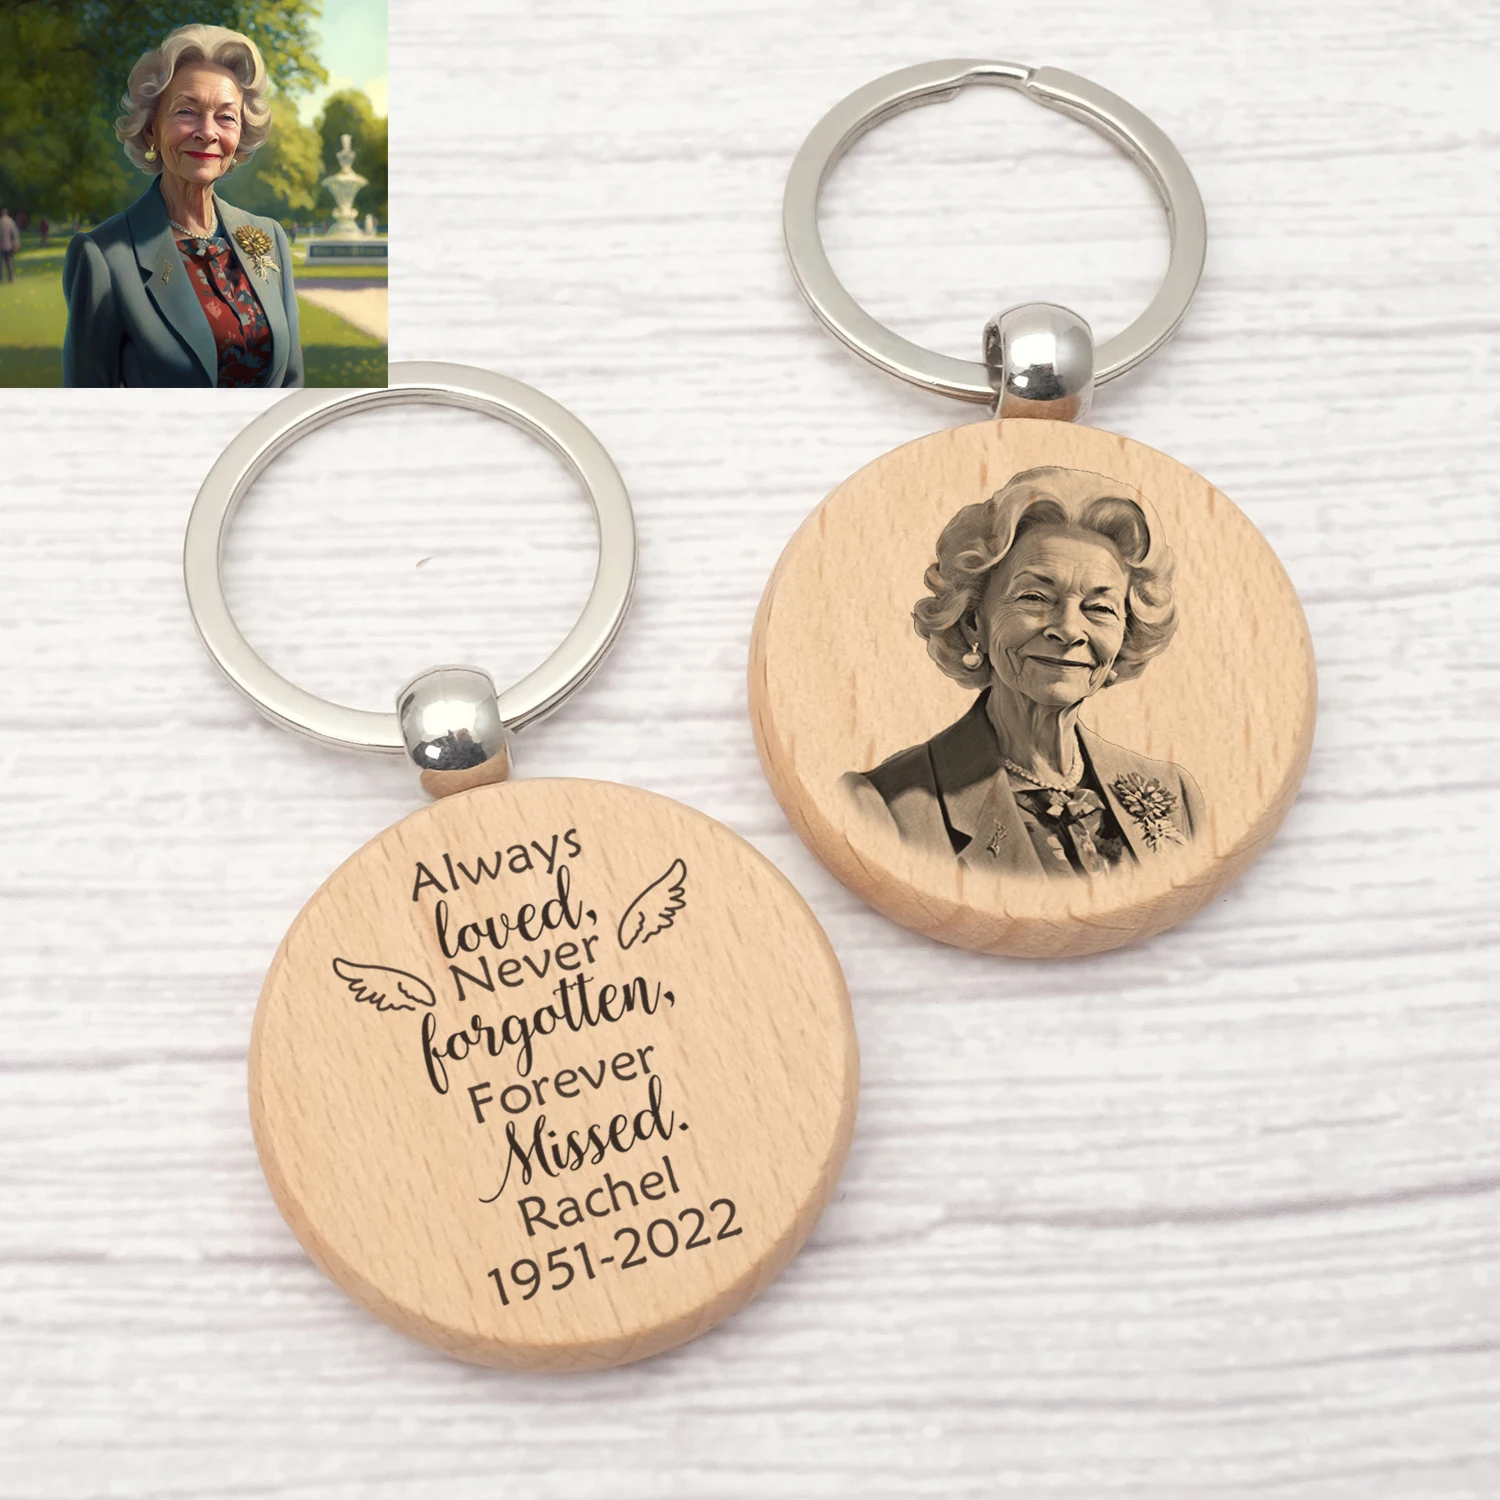 Custom Memorial Keychain Personalized Photo Key Ring Engraved Your Text Sympathy Gifts for Loss of Loved One Family Friends Gift customize wedding stickers invitation favor labels add your logo pictures text personalization custom stickers 100pcs